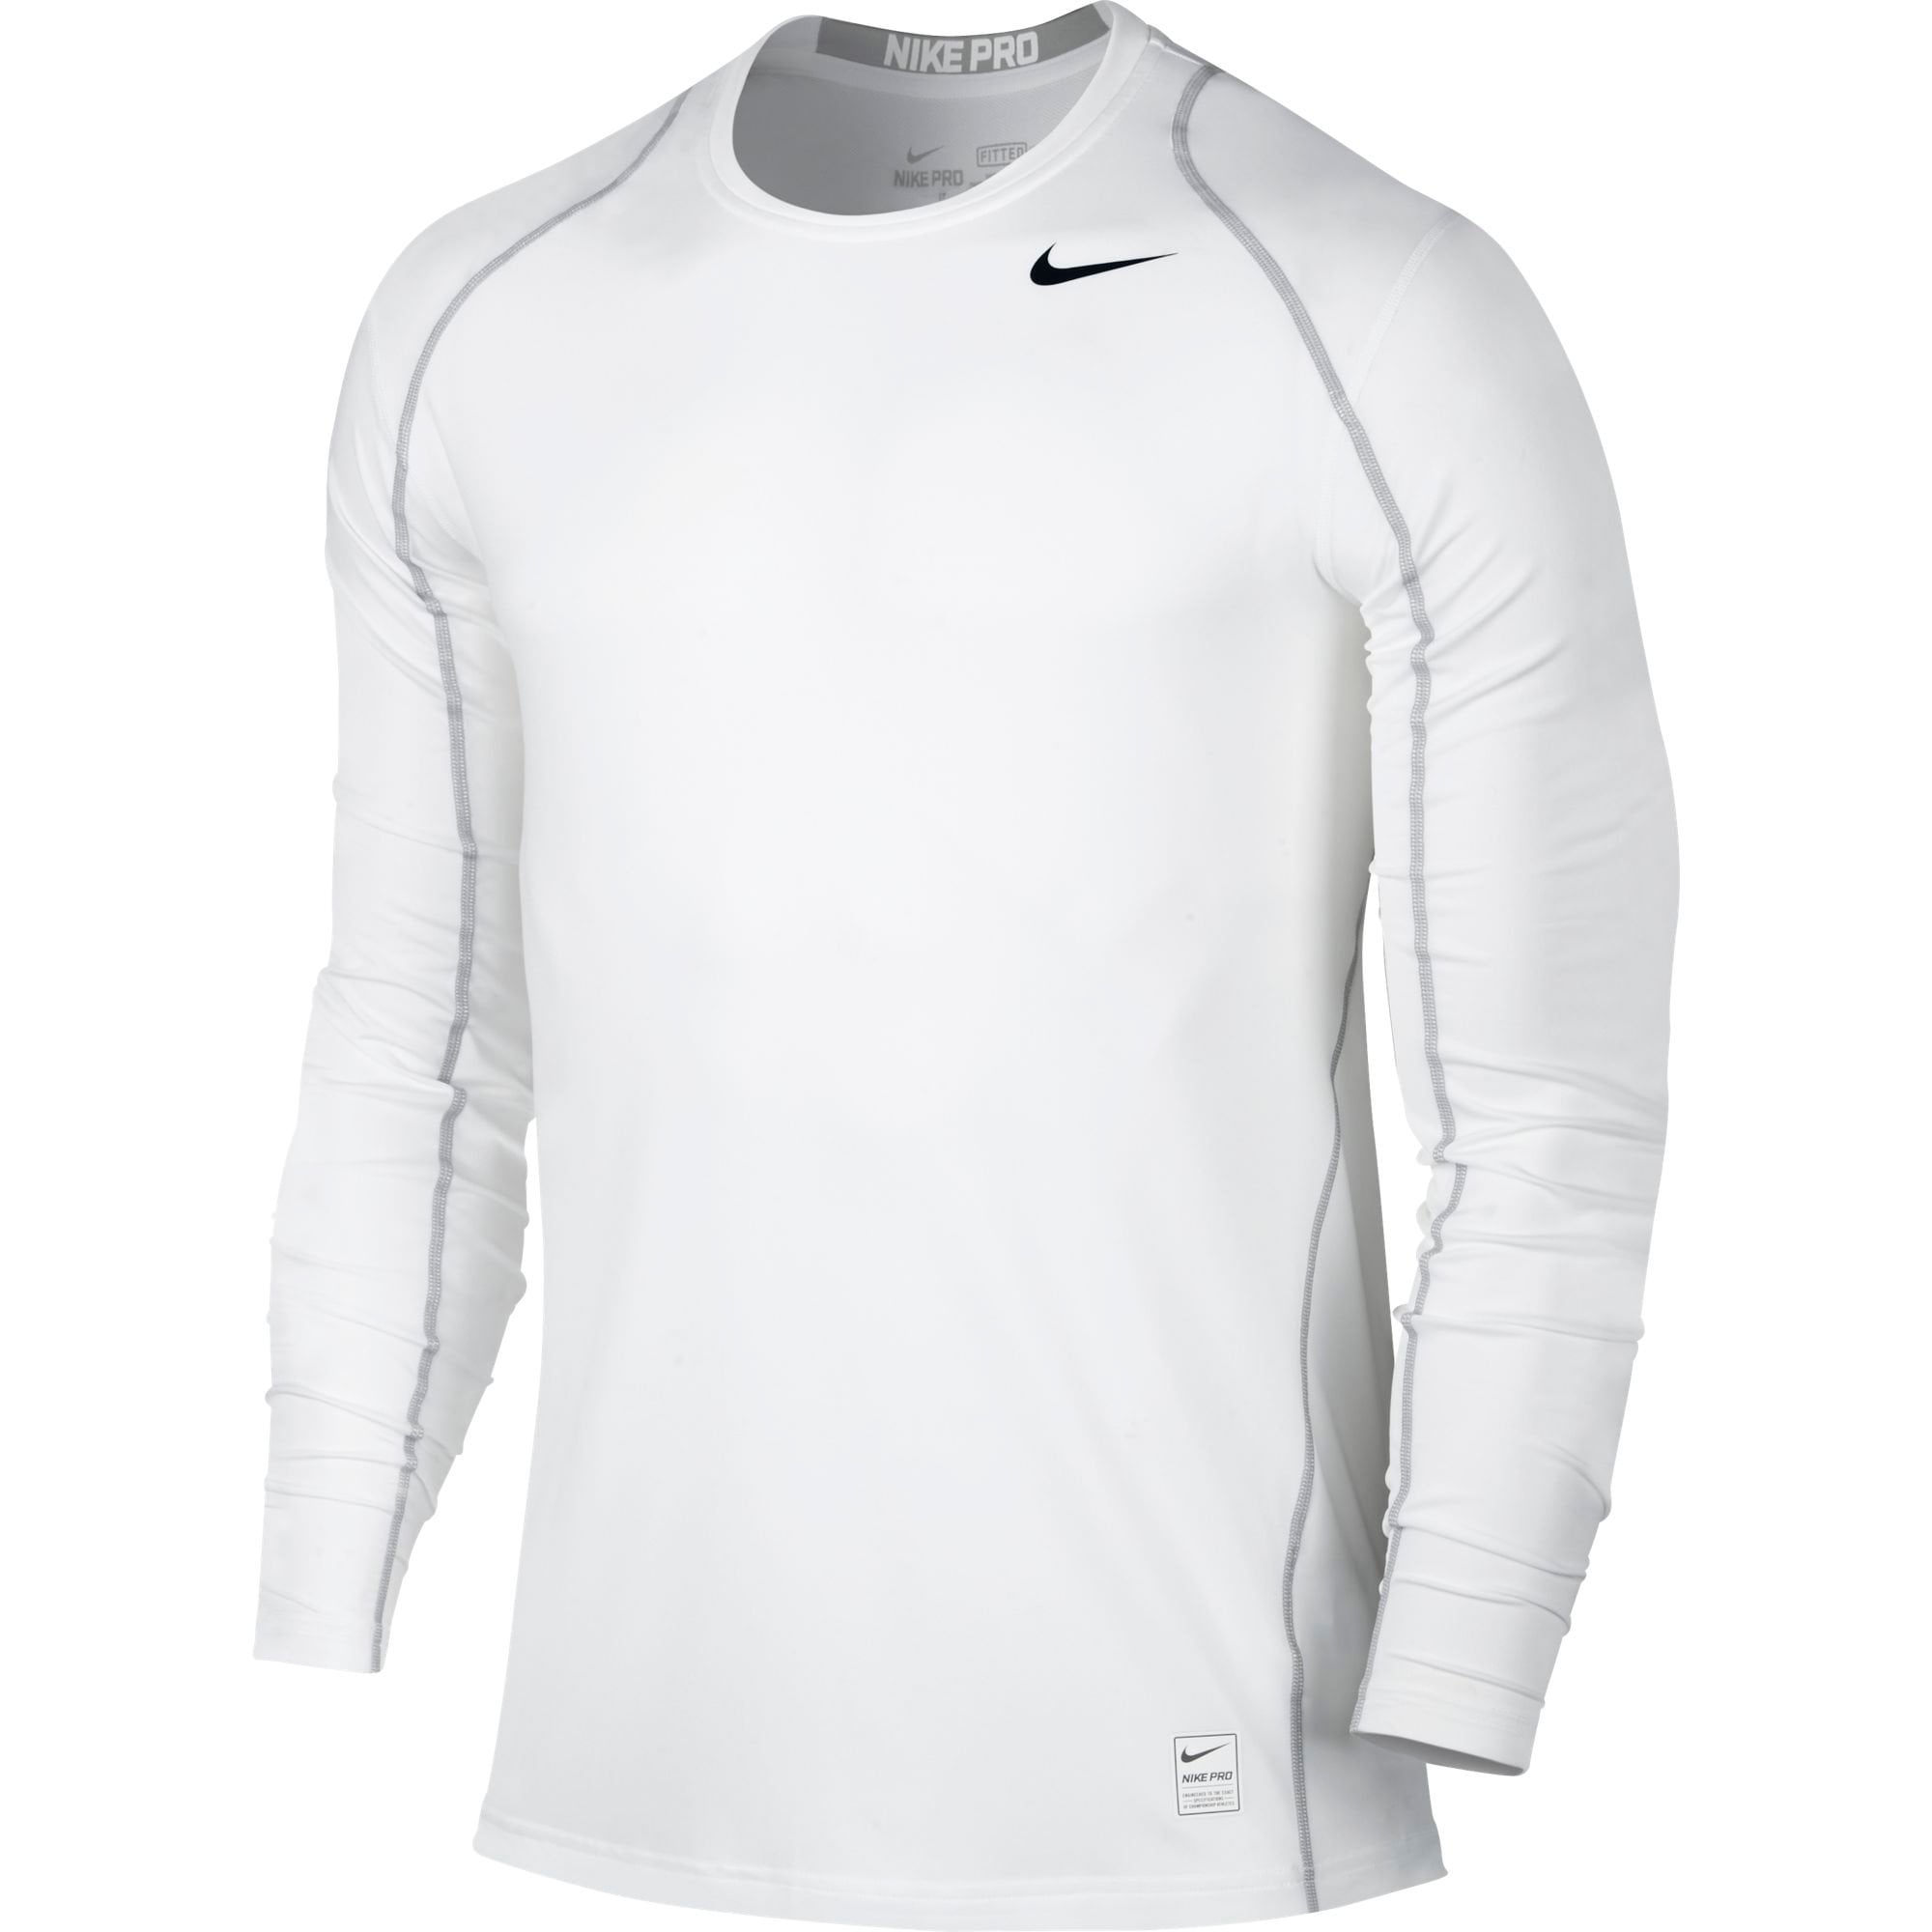 Nike Dri-Fit Men's Pro Cool Fitted Long Sleeve Shirt 703100-100 White ...